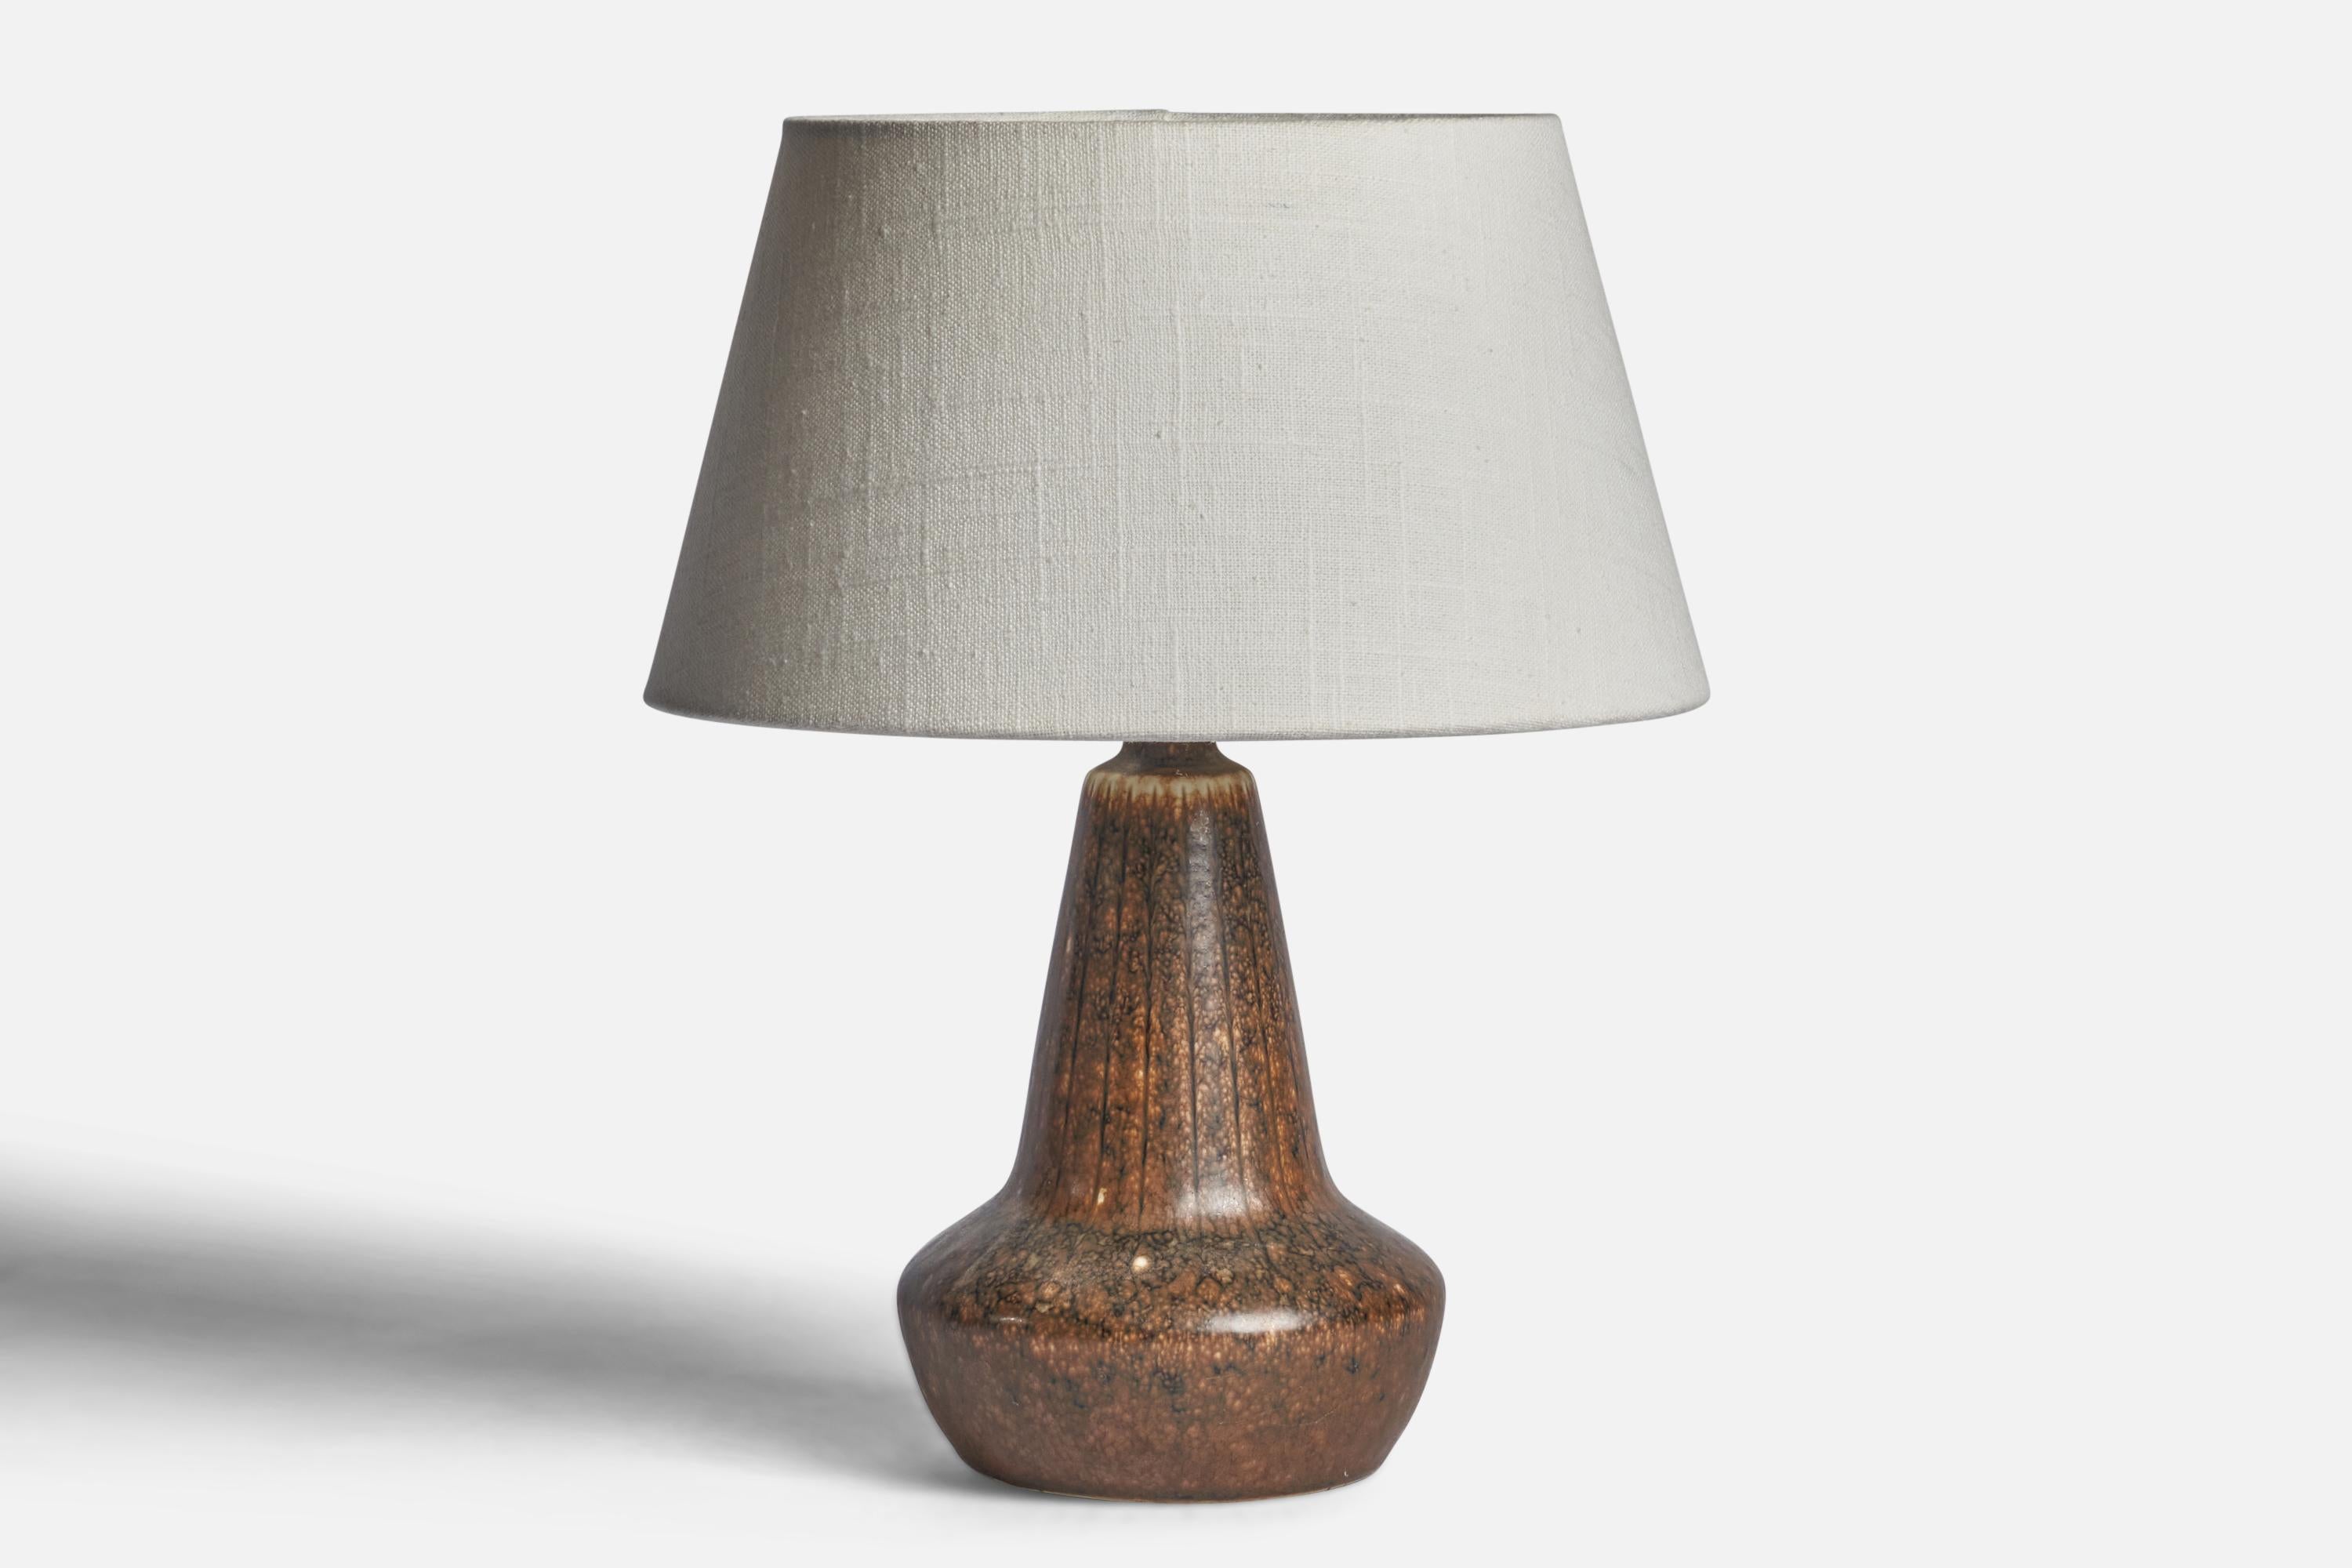 A brown-glazed stoneware table lamp designed by Gunnar Nylund and produced by Rörstrand, Sweden, 1940s.

Dimensions of Lamp (inches): 9.75” H x 5.5” Diameter
Dimensions of Shade (inches): 7” Top Diameter x 10” Bottom Diameter x 5.5” H 
Dimensions of